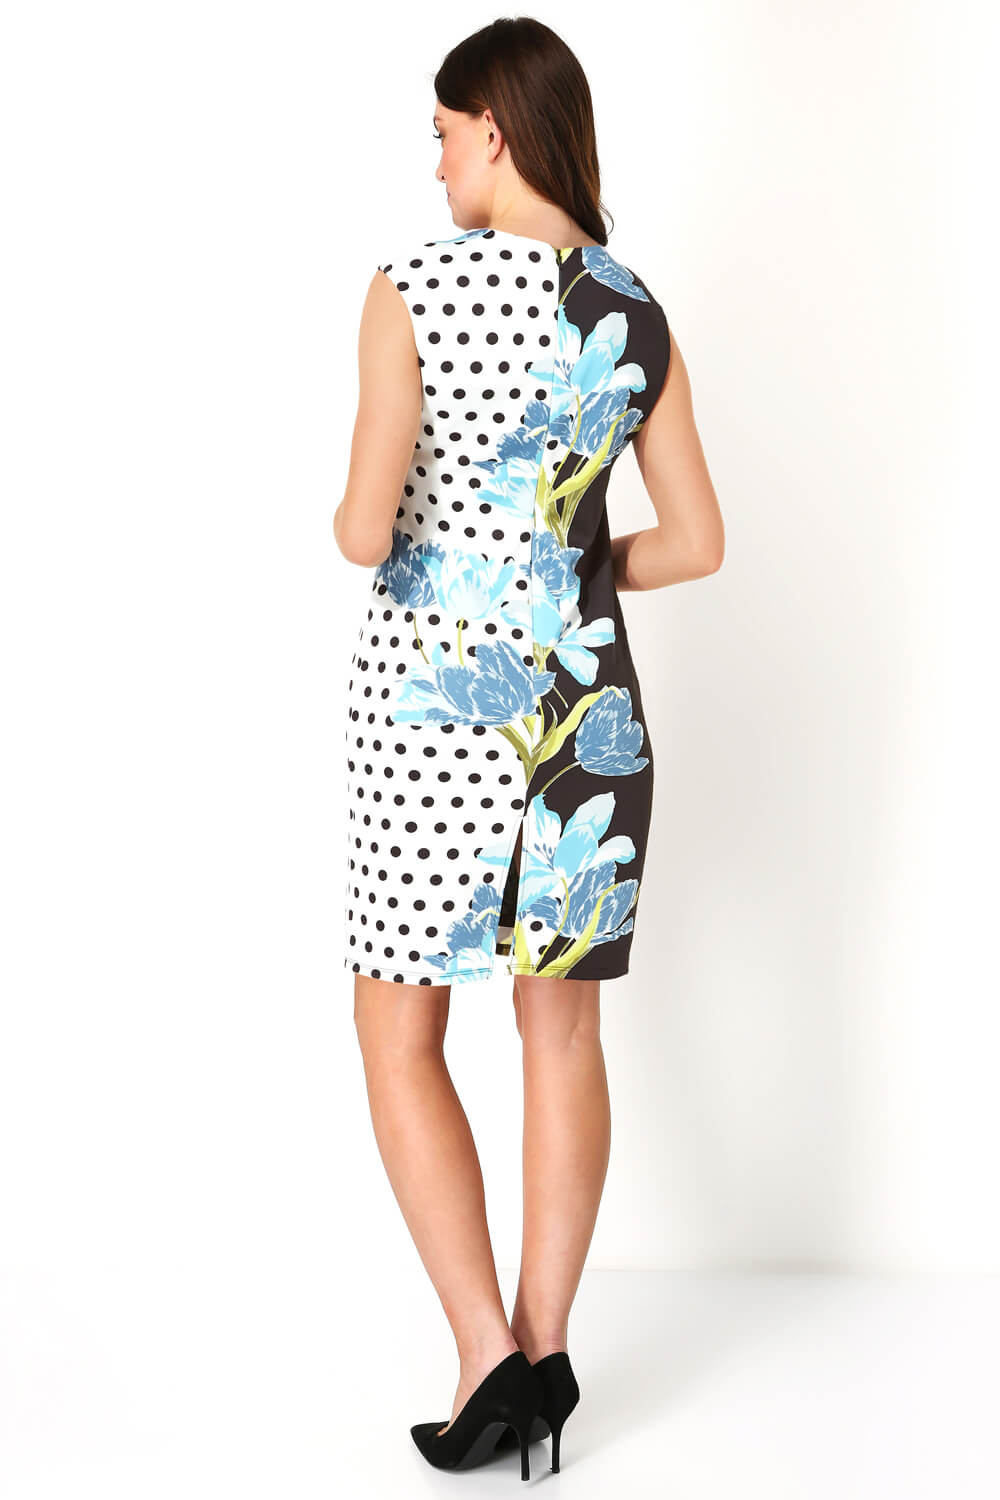 Turquoise Sweetheart Spot Floral Stretch Dress, Image 3 of 5